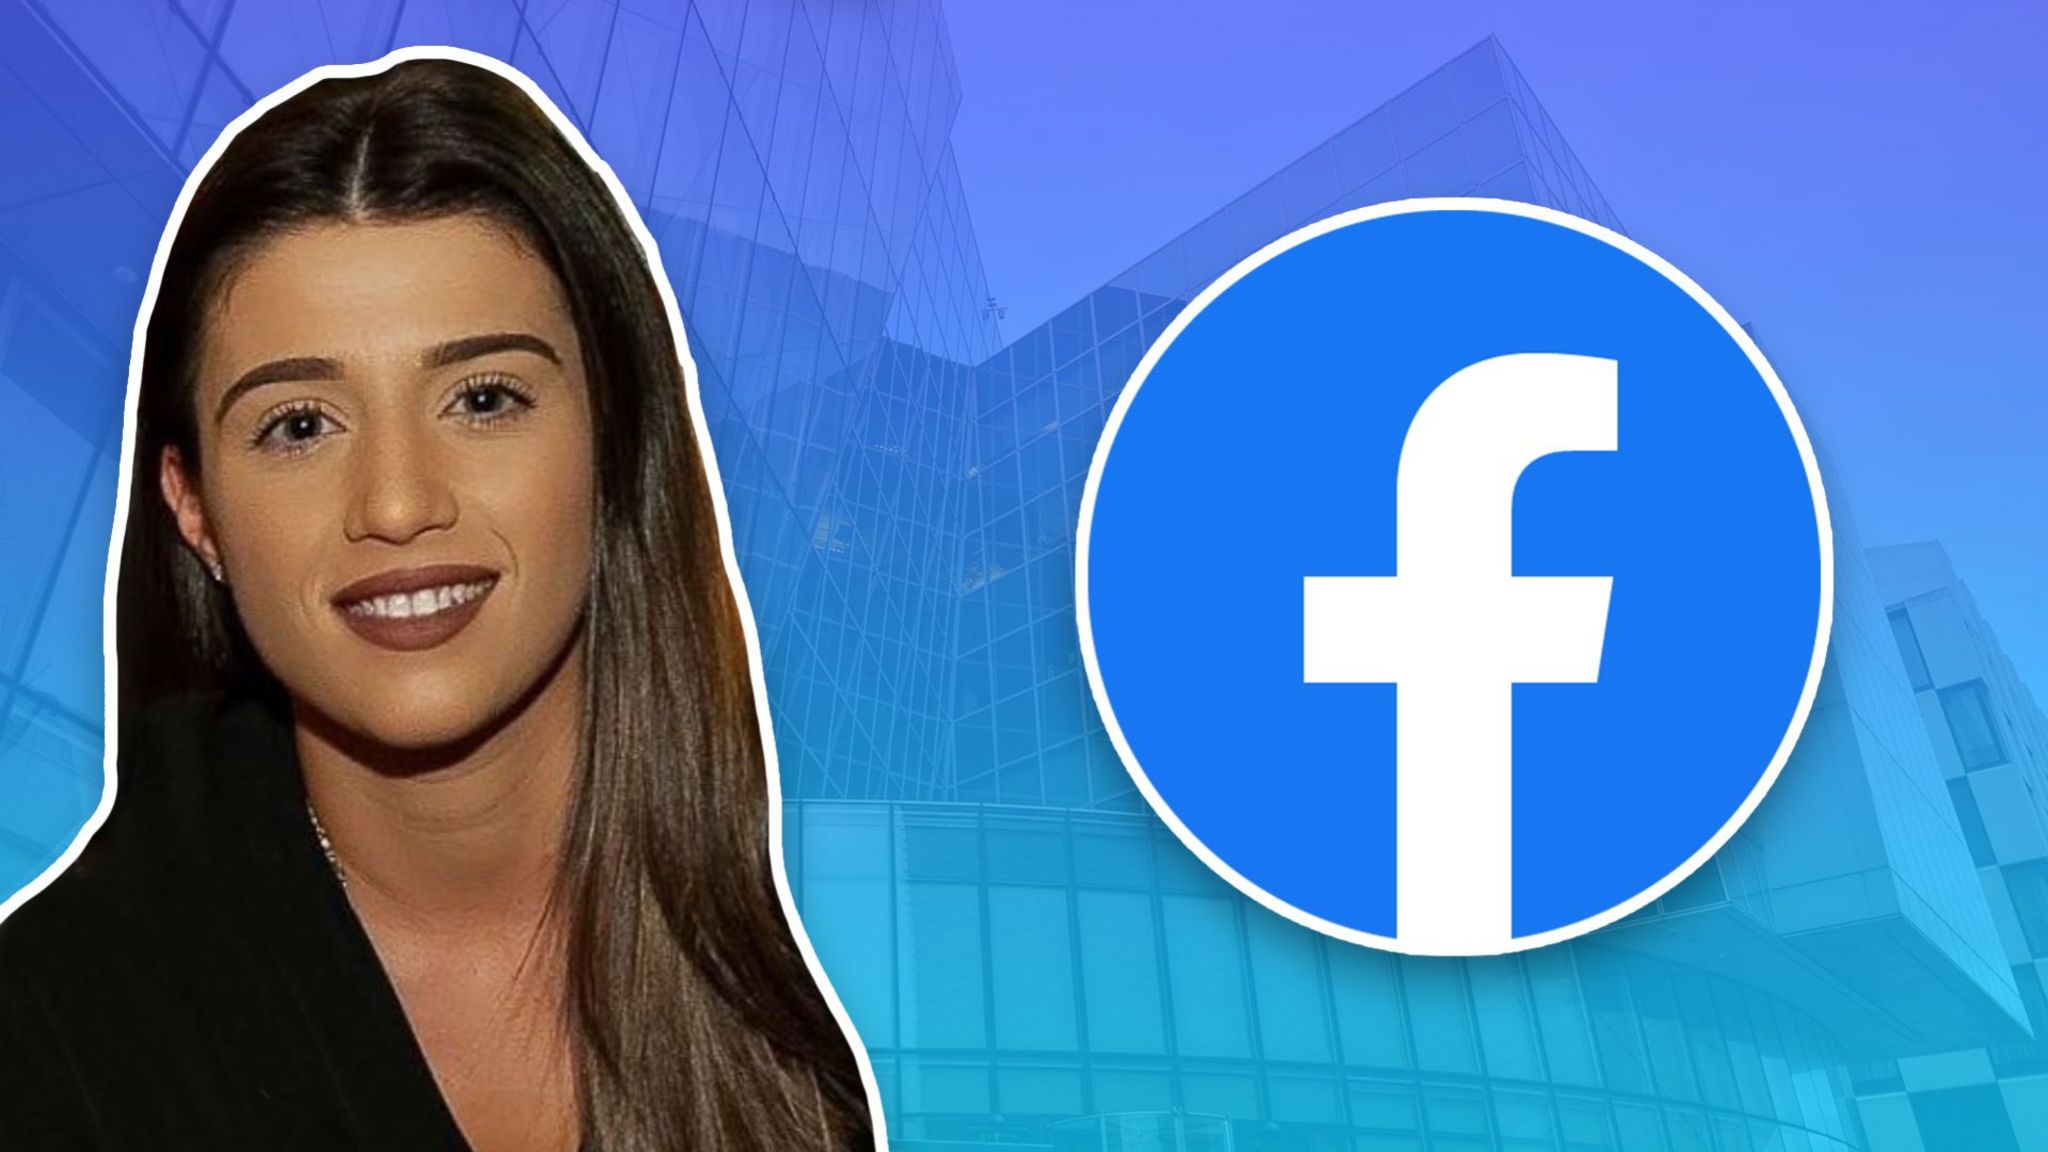 Isabella Plunkett with a Facebook logo in front of Dublin HQ